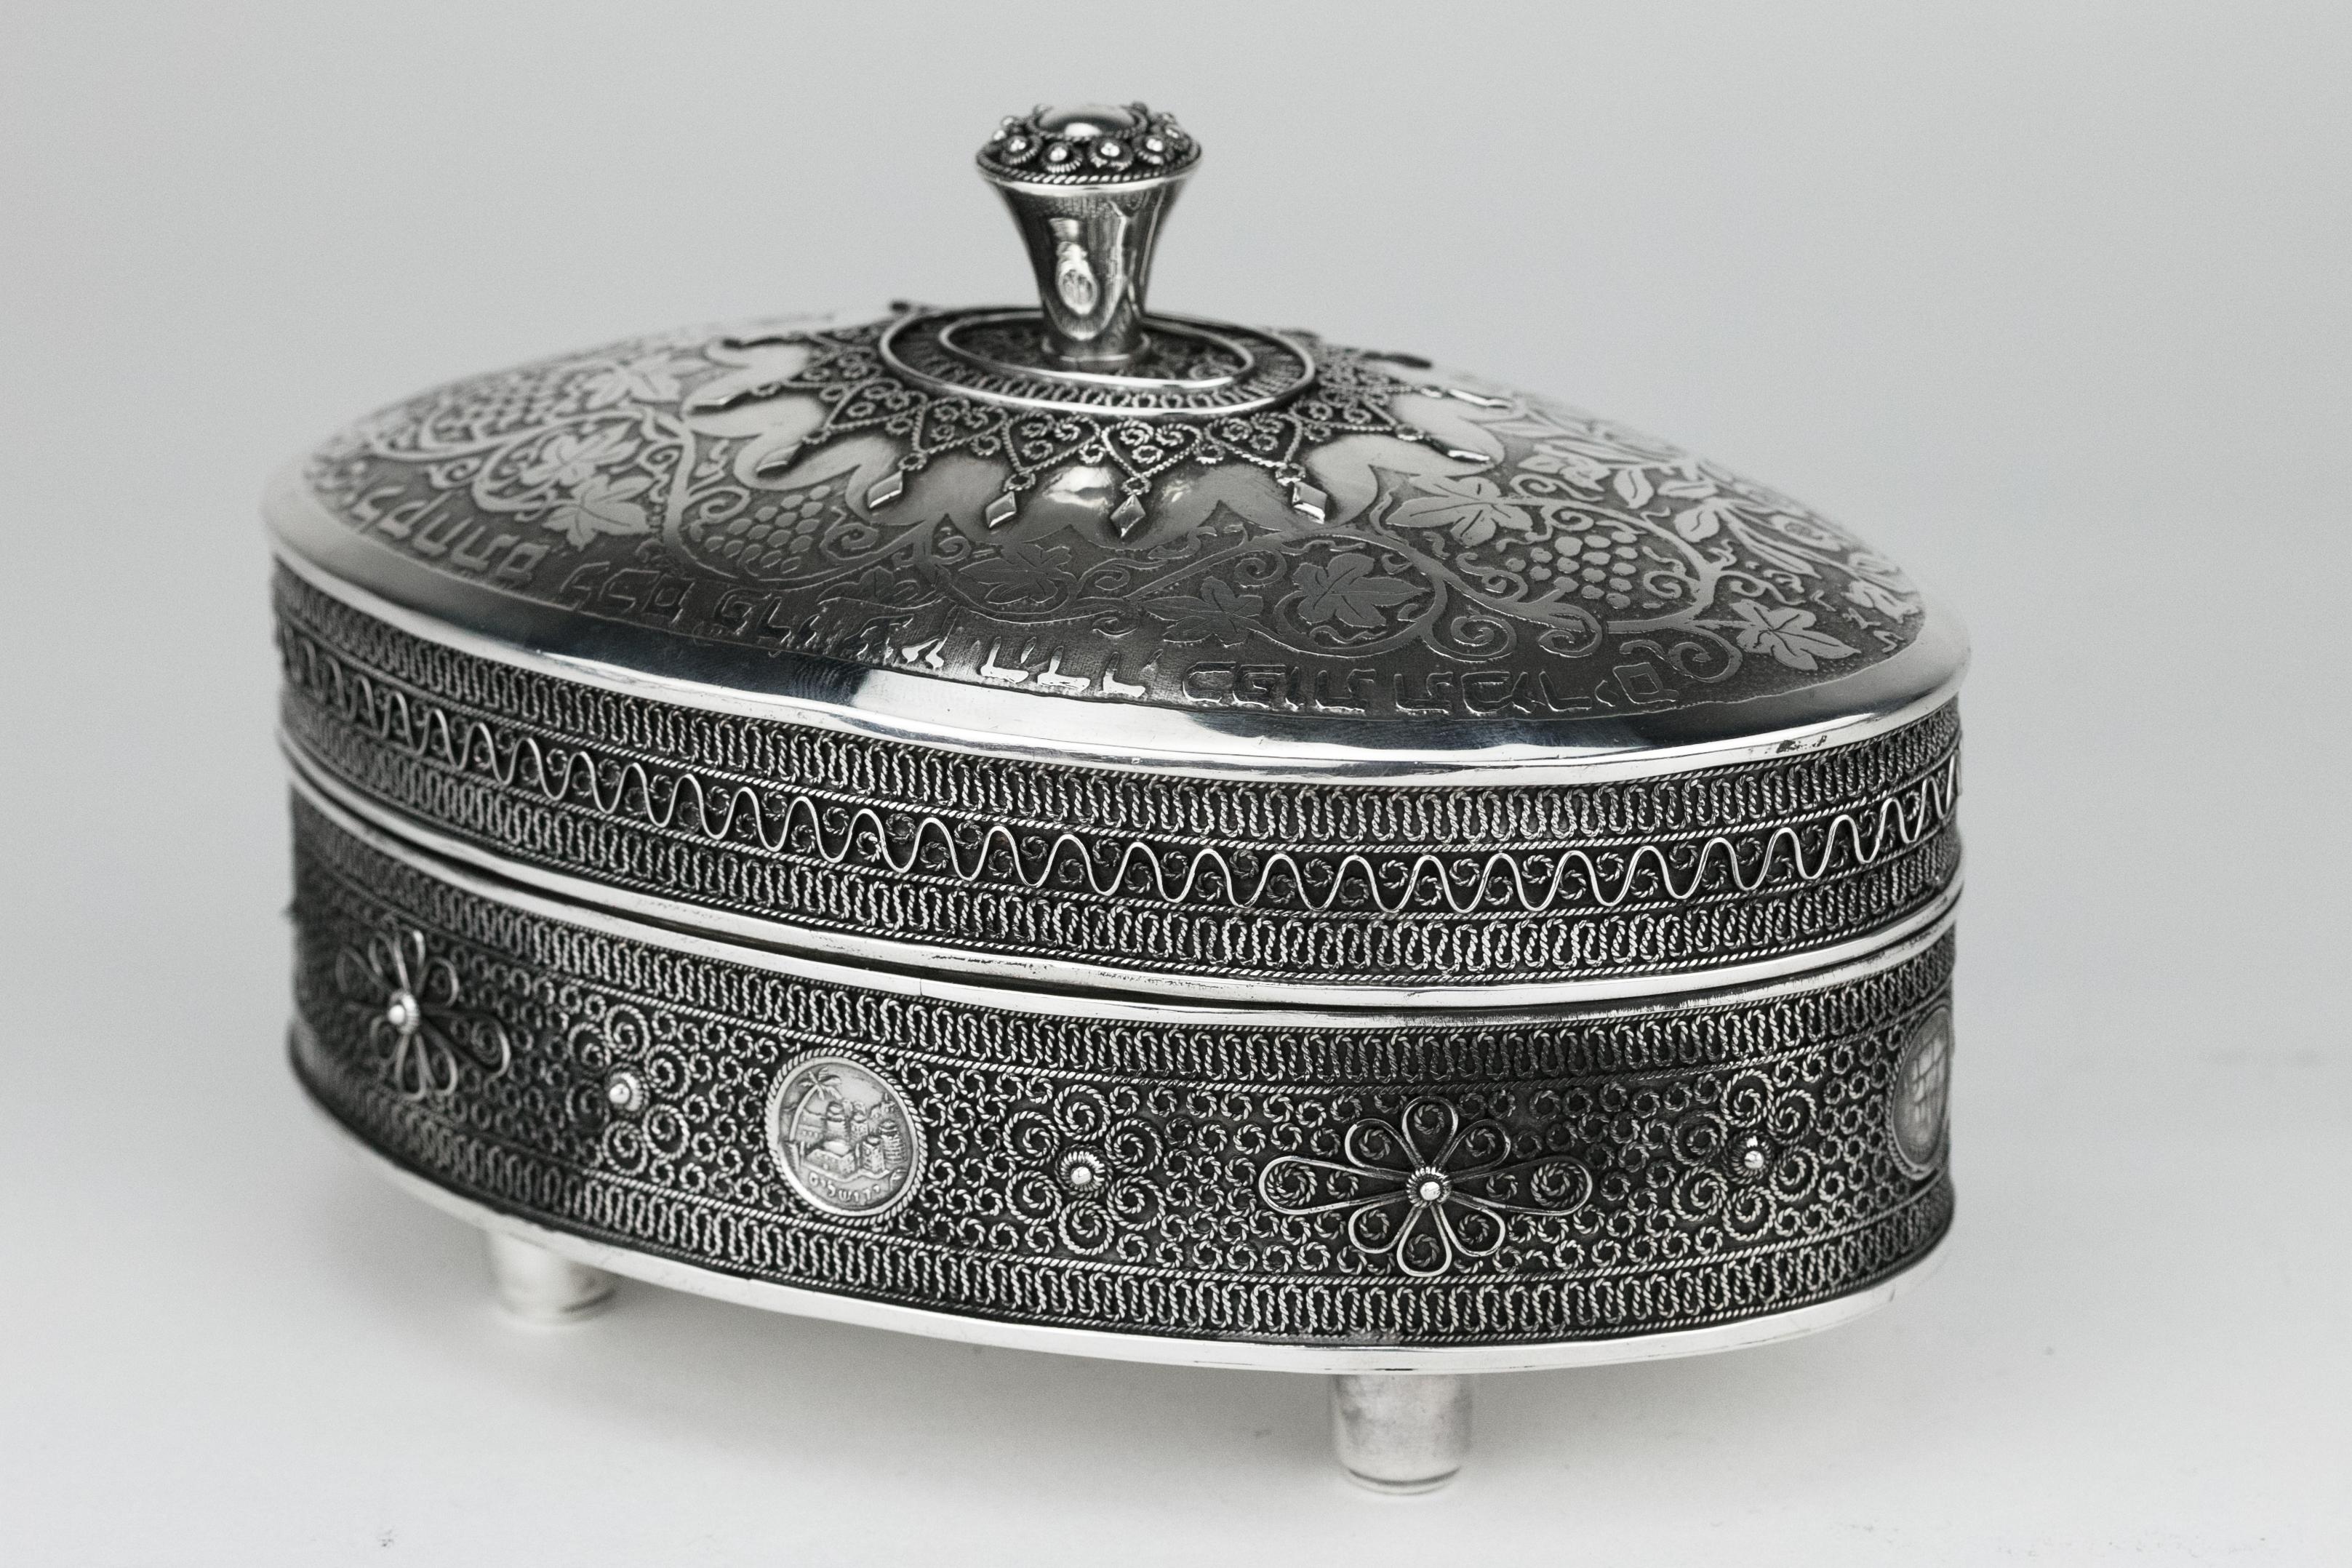 Silver and silver filigree Etrog container, Bezalel School, Jerusalem, circa 1950.
The lid is etched with grapes, vines, pomegranates and leaves, decorated with silver filigree on the finial, and around the finial, and inscribed in etched Hebrew